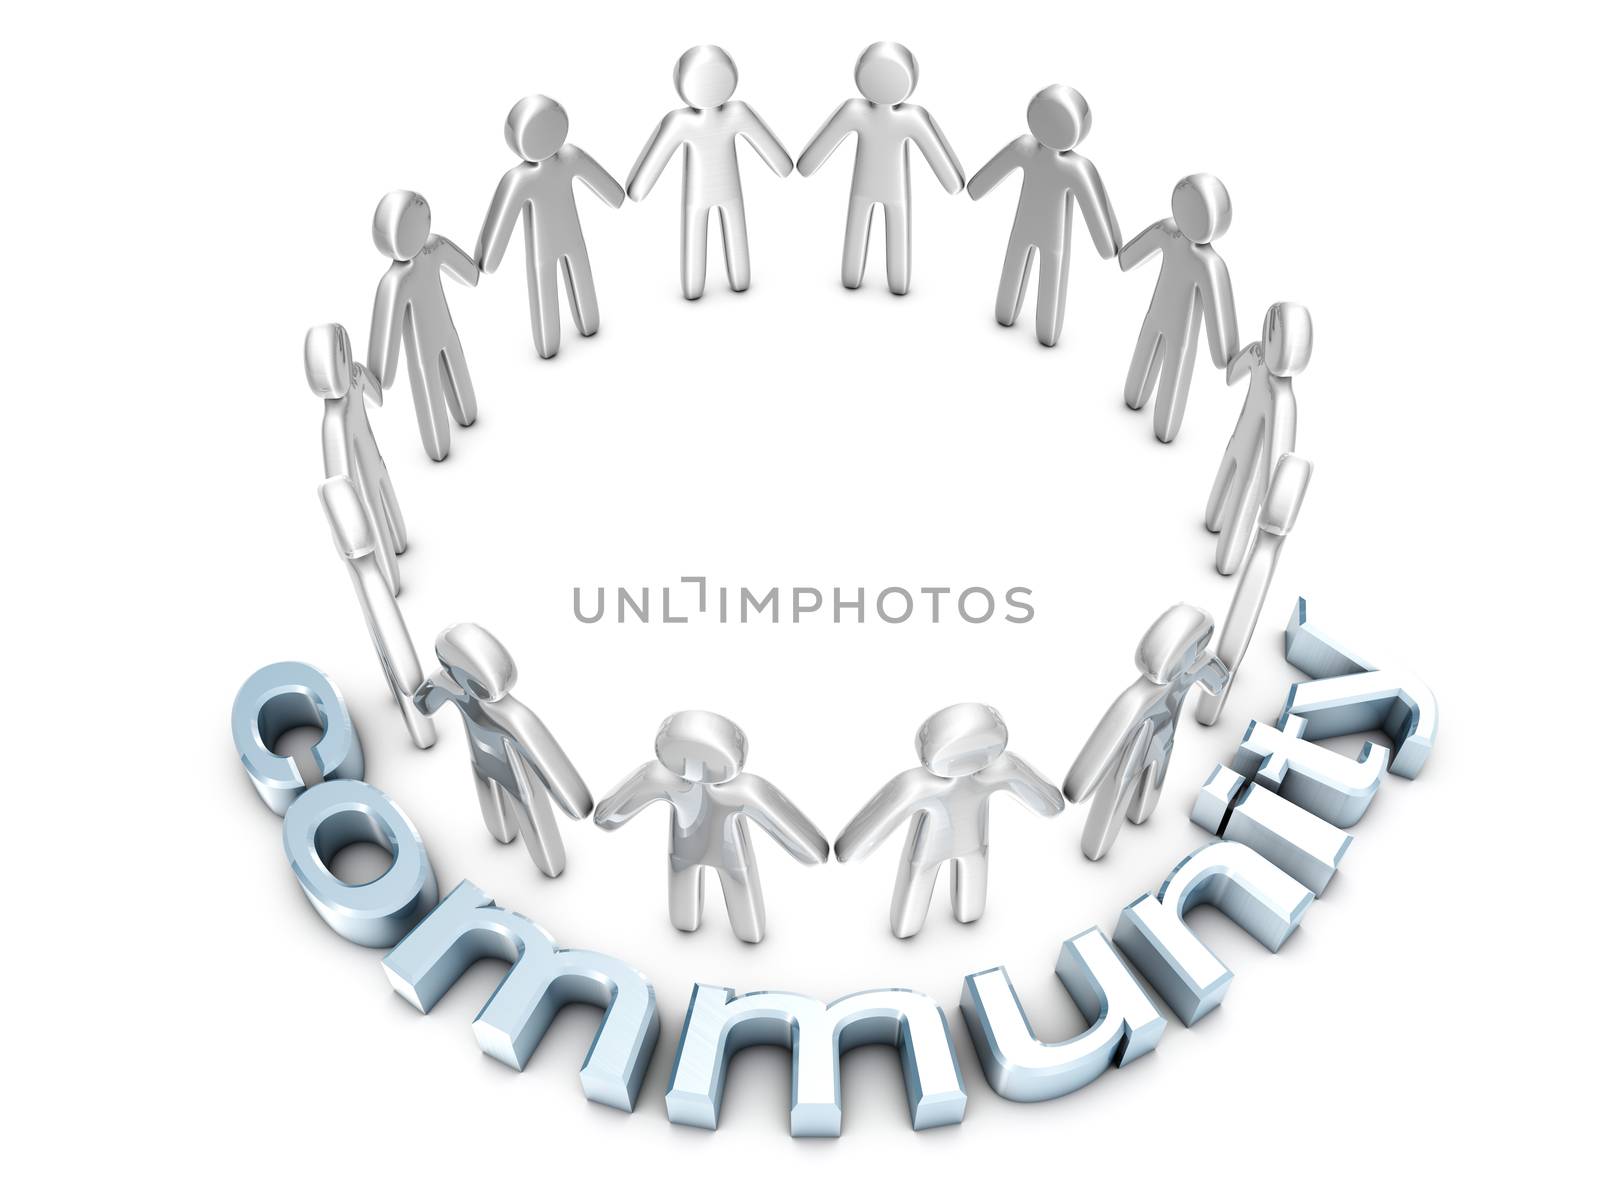 Community concept. A group of icon people standing in a circle.